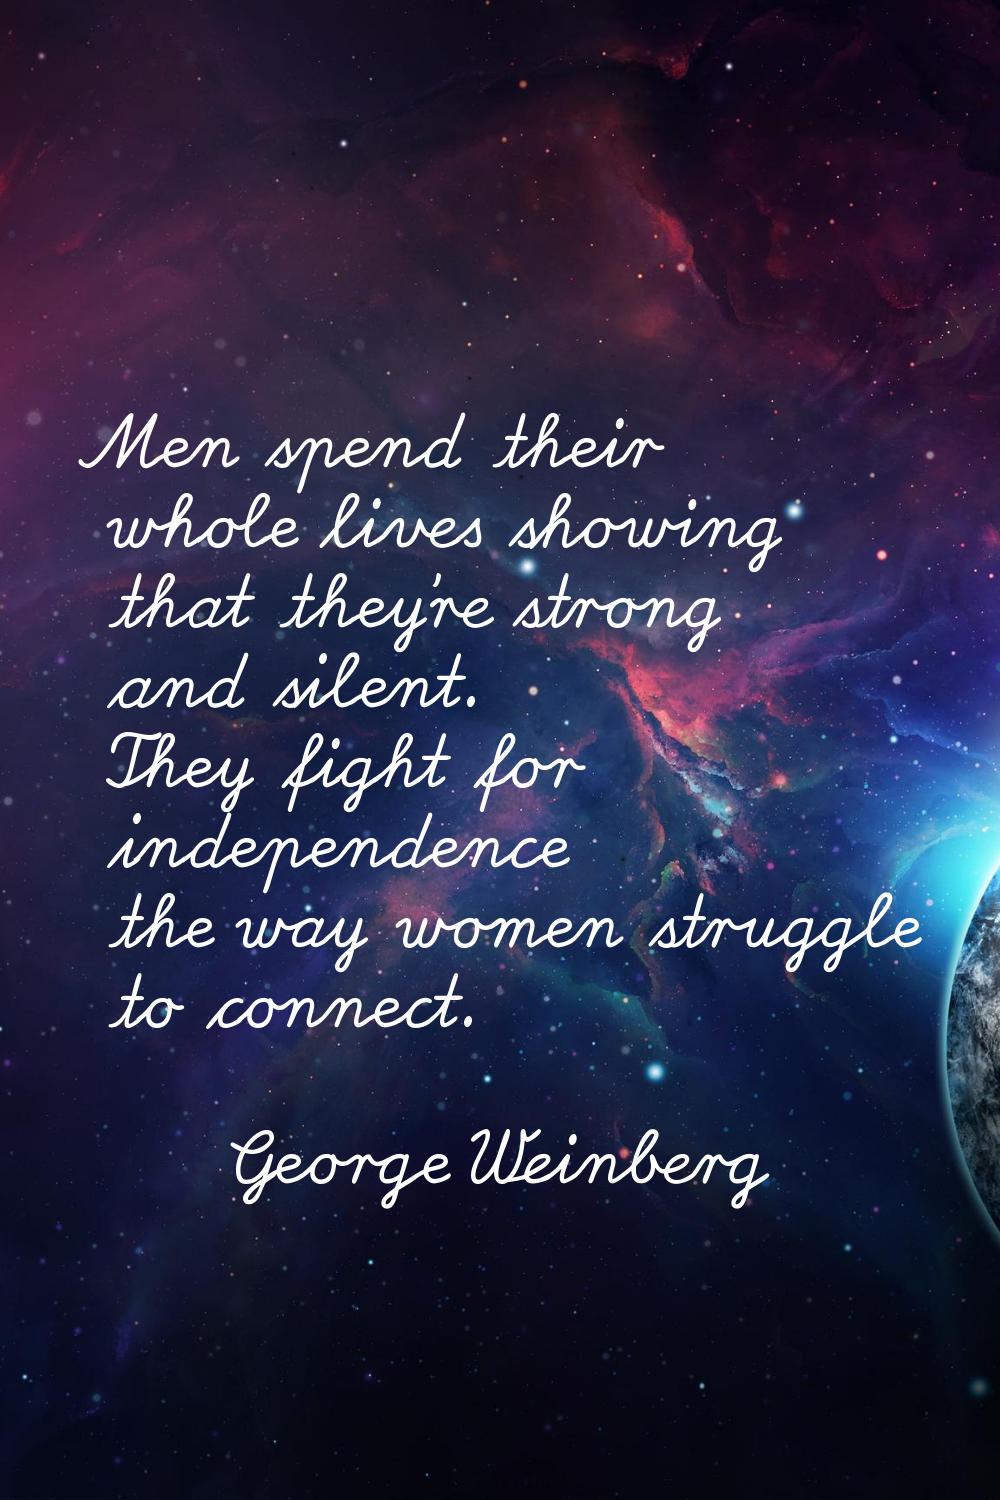 Men spend their whole lives showing that they're strong and silent. They fight for independence the